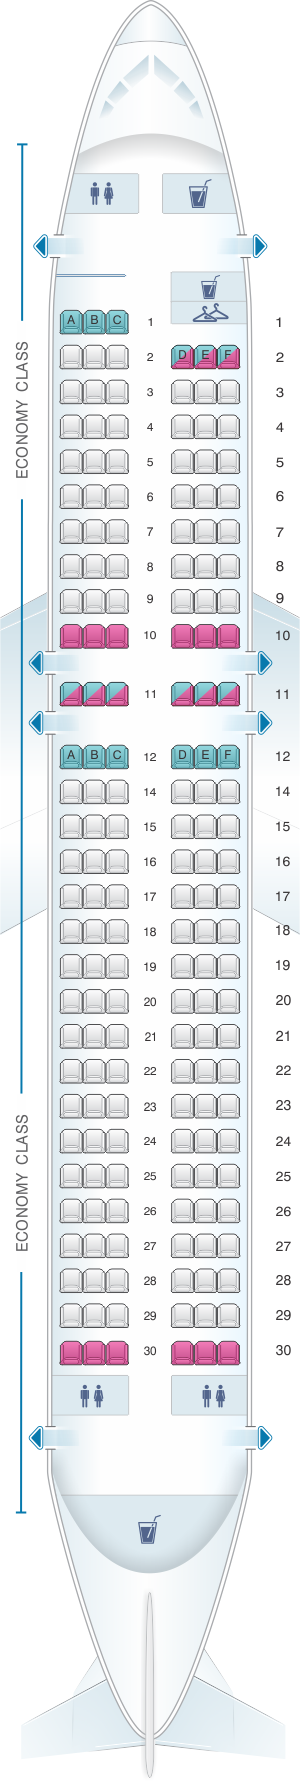 Seat map for Iberia Airbus A320 Express